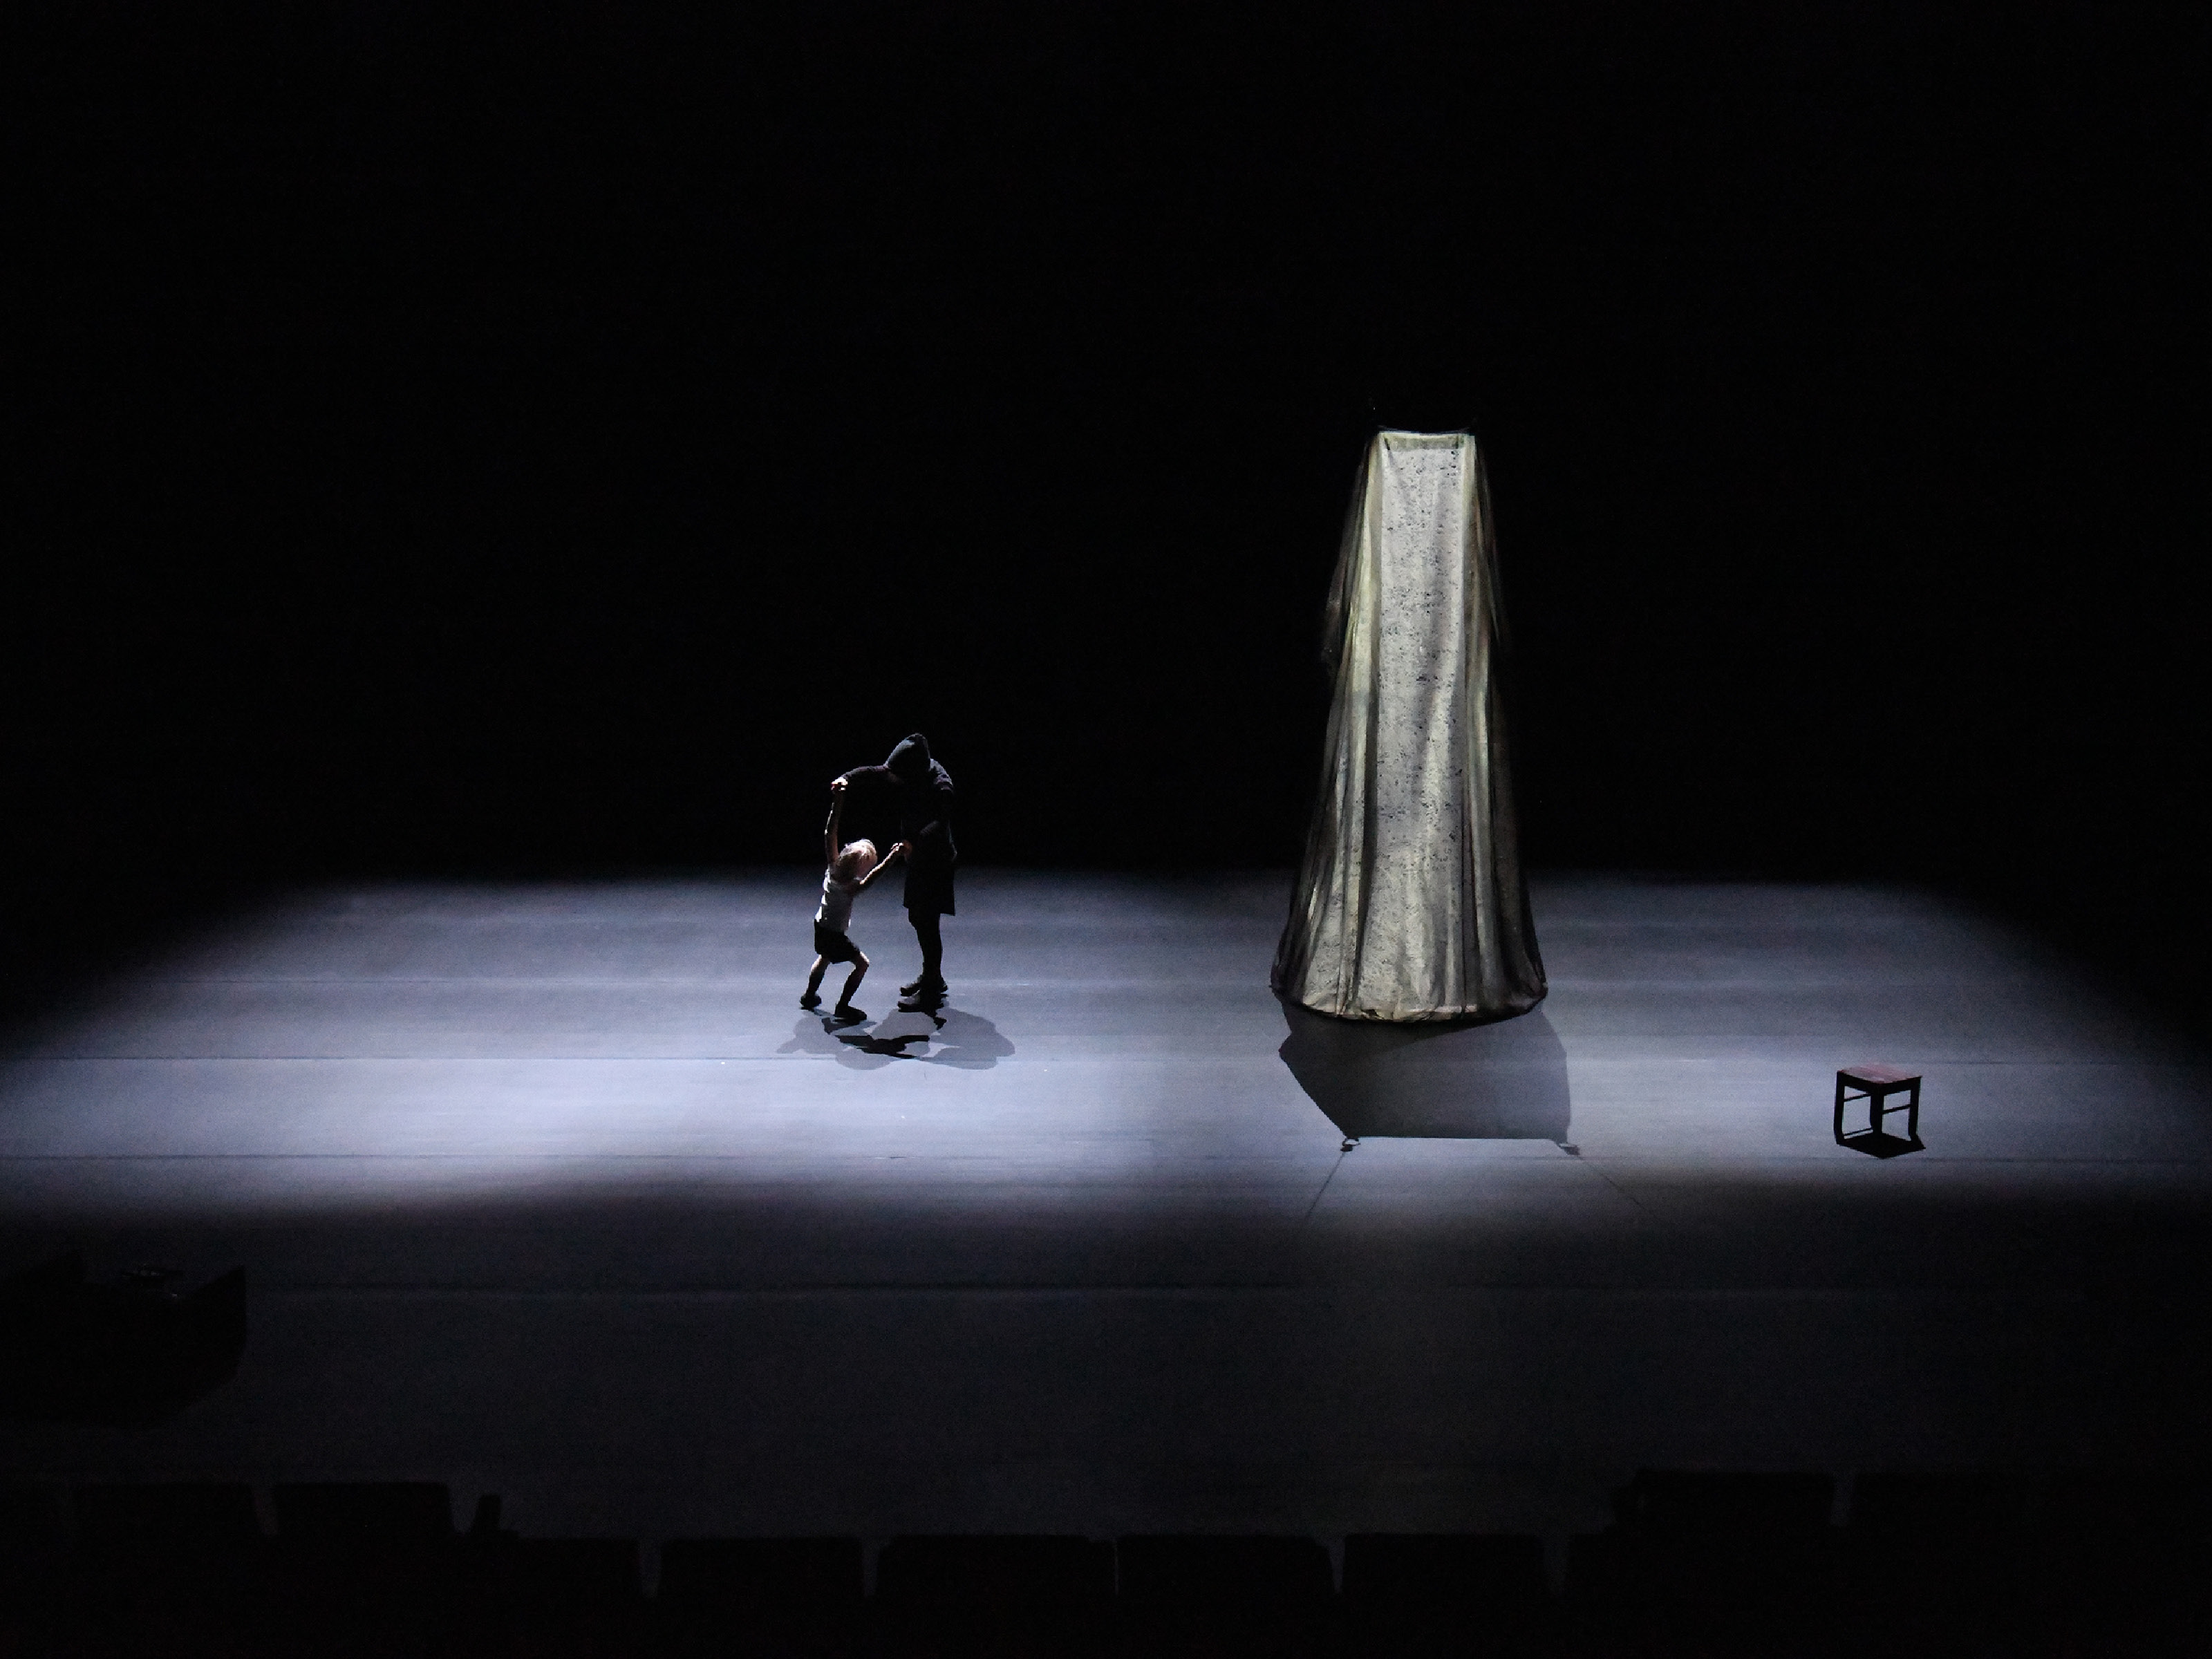 On a diffusely lit stage, a human, all in black with a hood over his head, dances with a small boyish doll. The stage also includes a cylindrical falling shimmering fabric and a small stool.